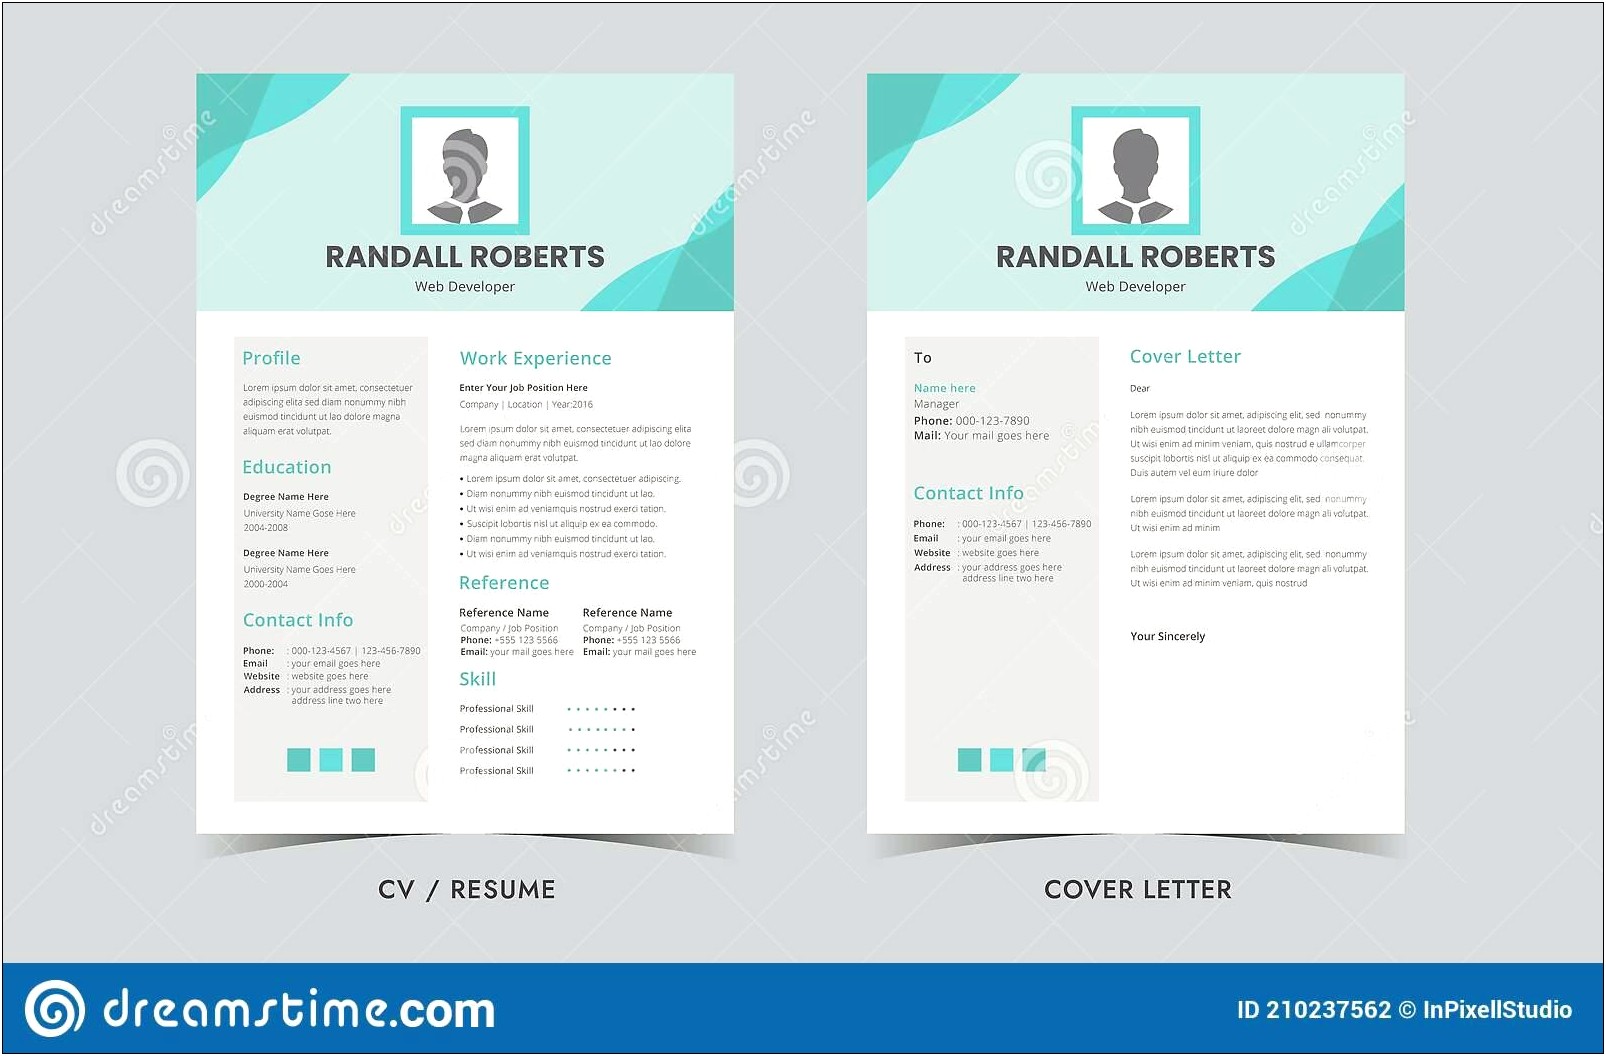 Free Sample Professional Resume Cover Letter